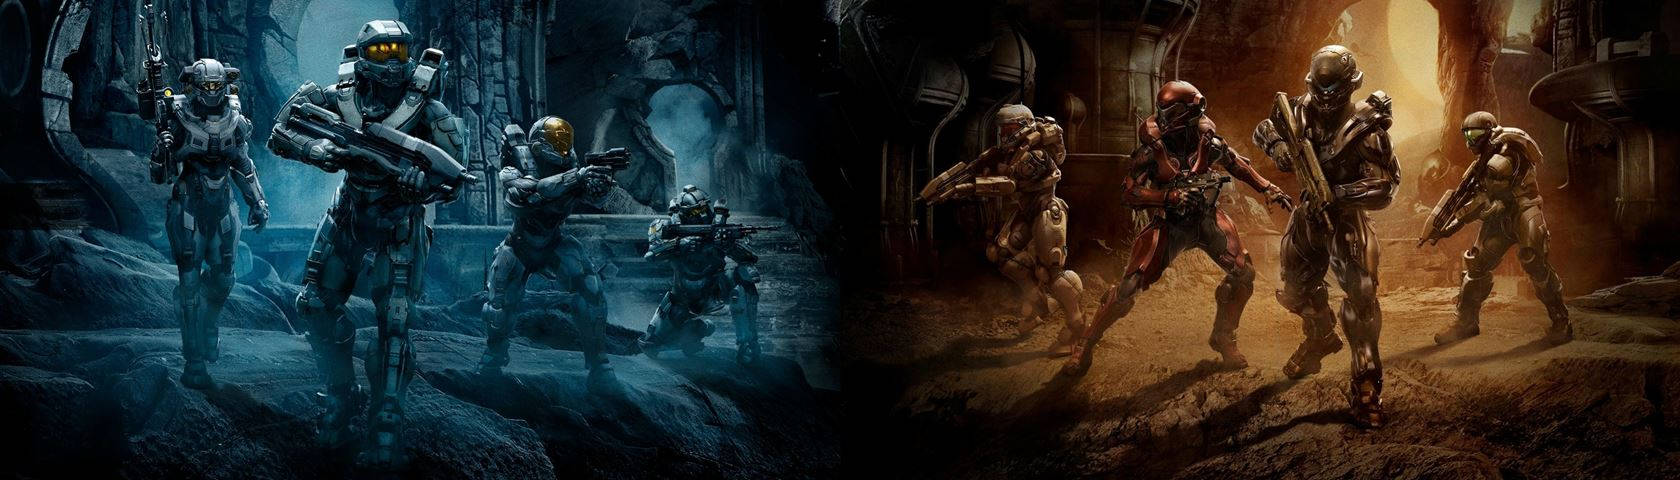 Halo 5 Guardians Dual Screen Background